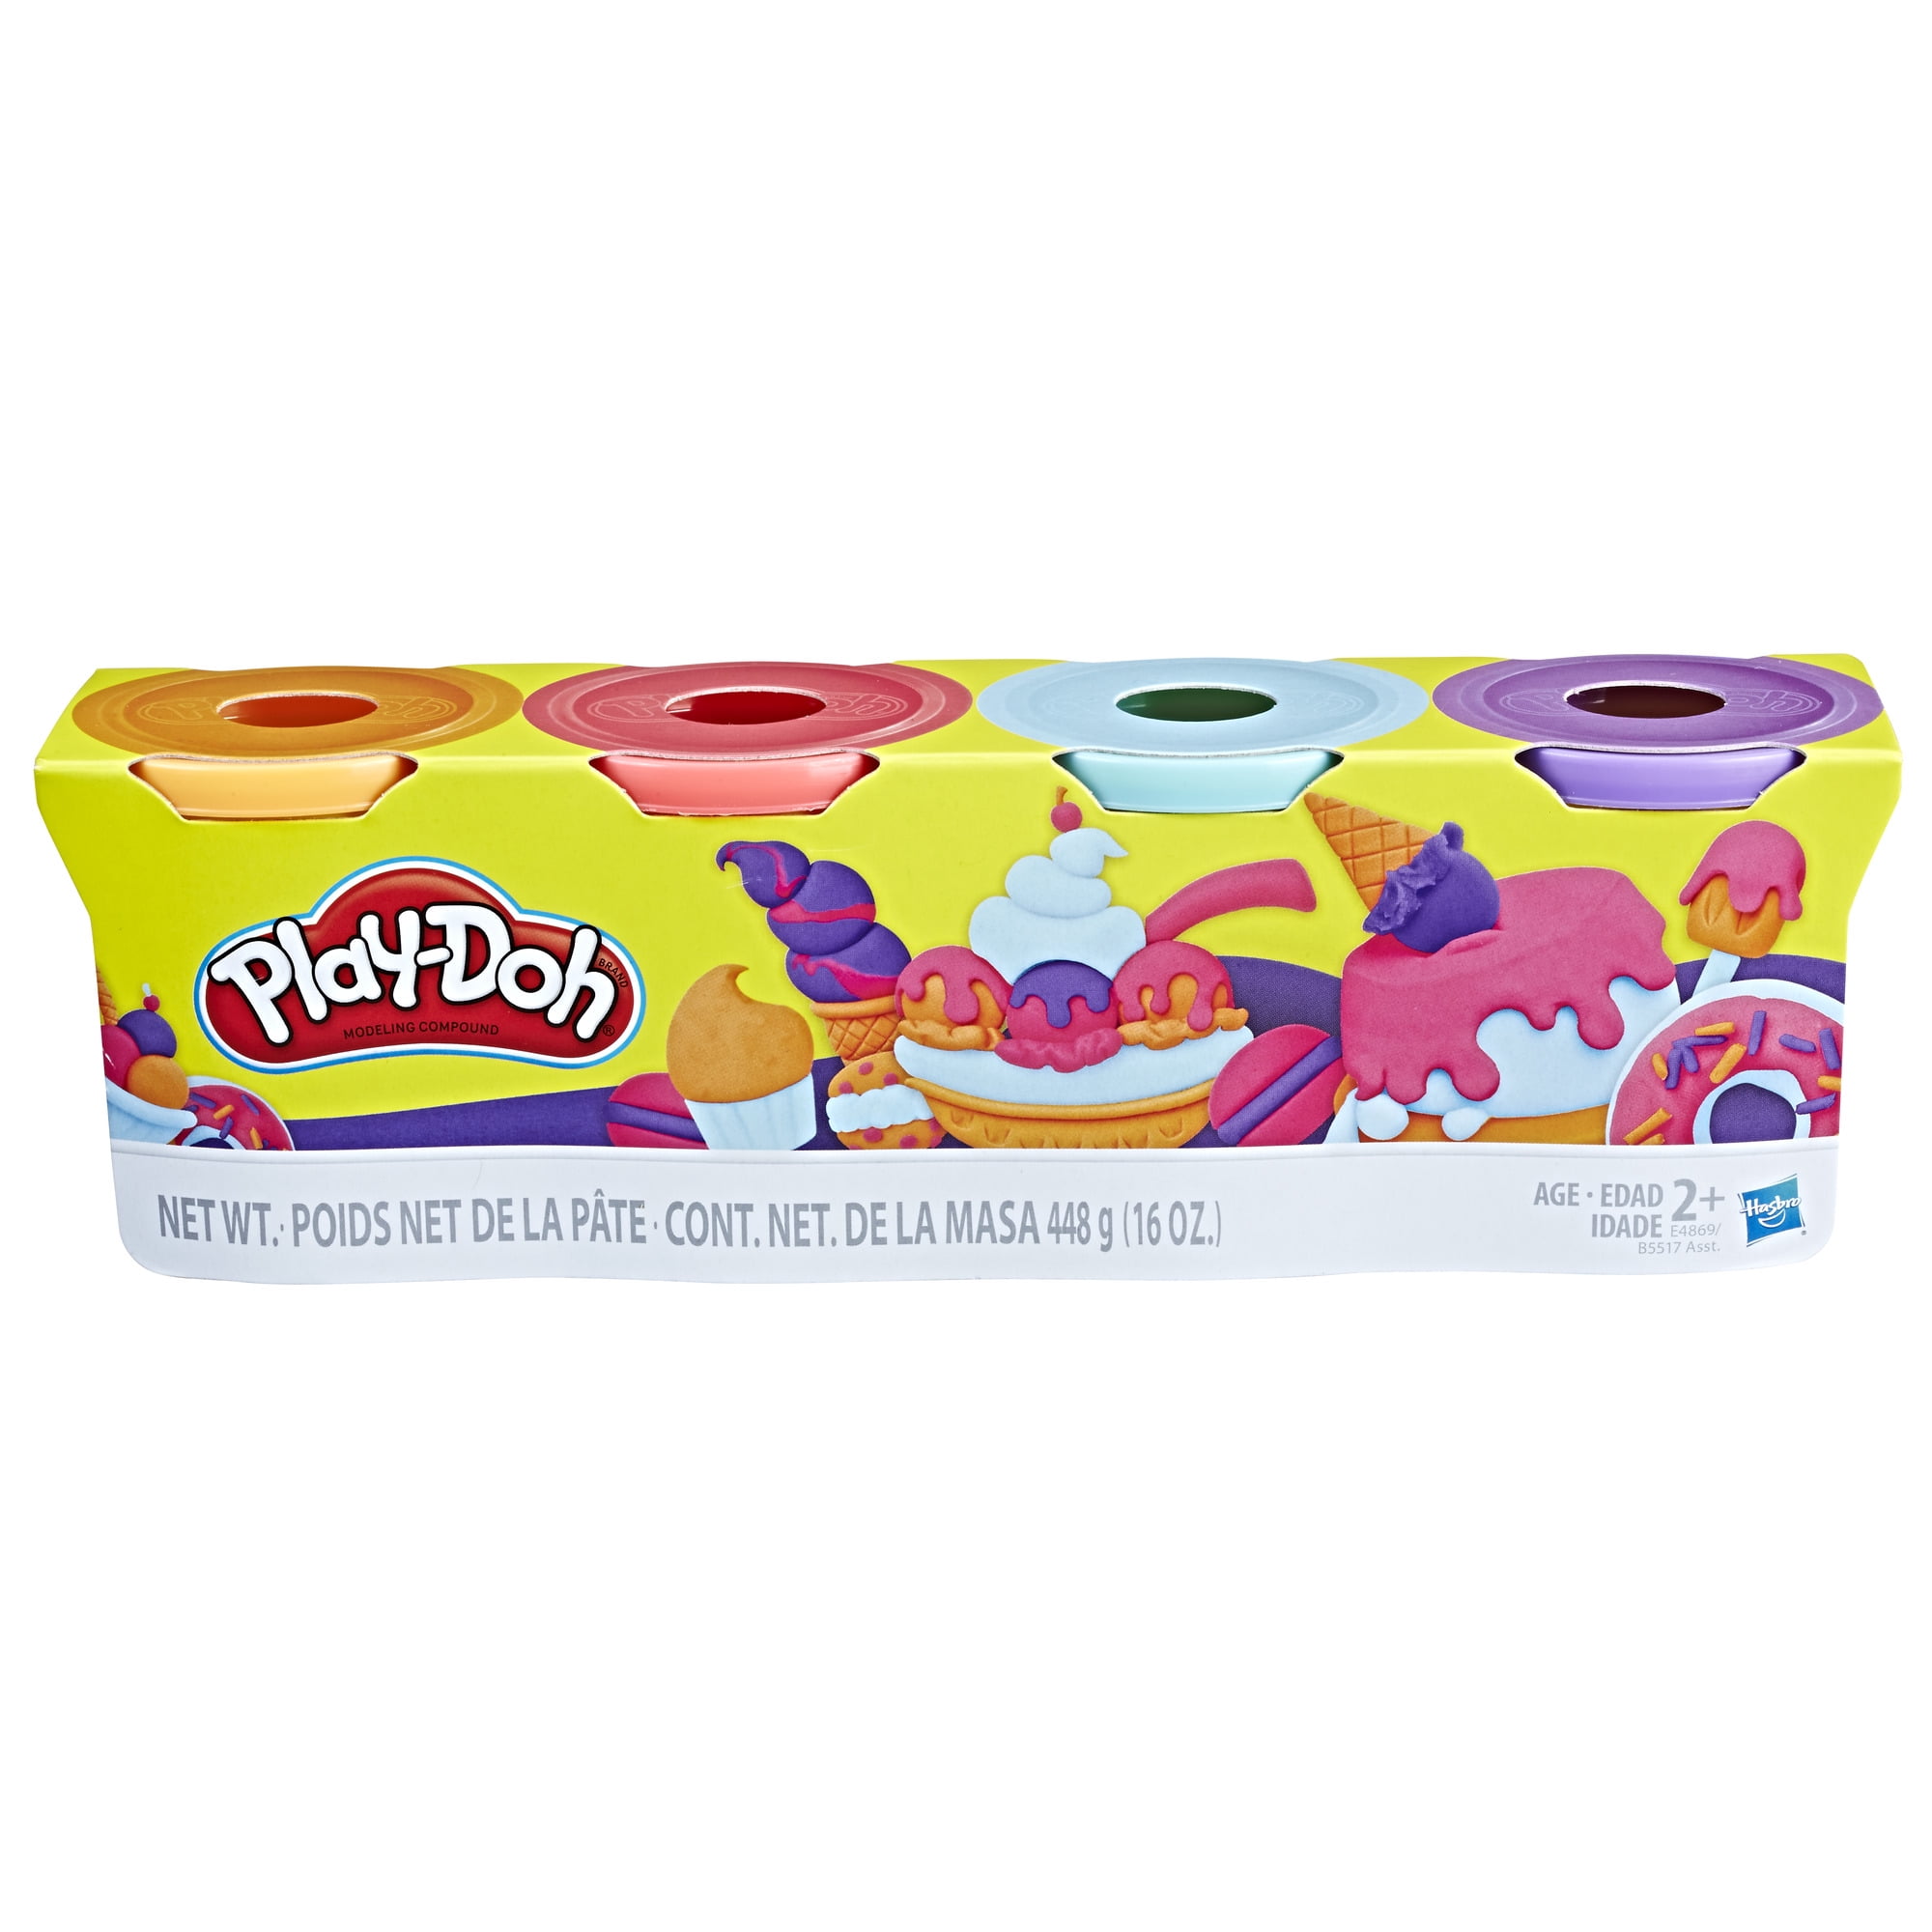 Play Doh Modeling Compound 4 4 Oz Cans Of Play Doh Sweet Colors 16 Oz Walmart Com Walmart Com It has a global traffic rank of #693,505 in the world. play doh modeling compound 4 4 oz cans of play doh sweet colors 16 oz walmart com